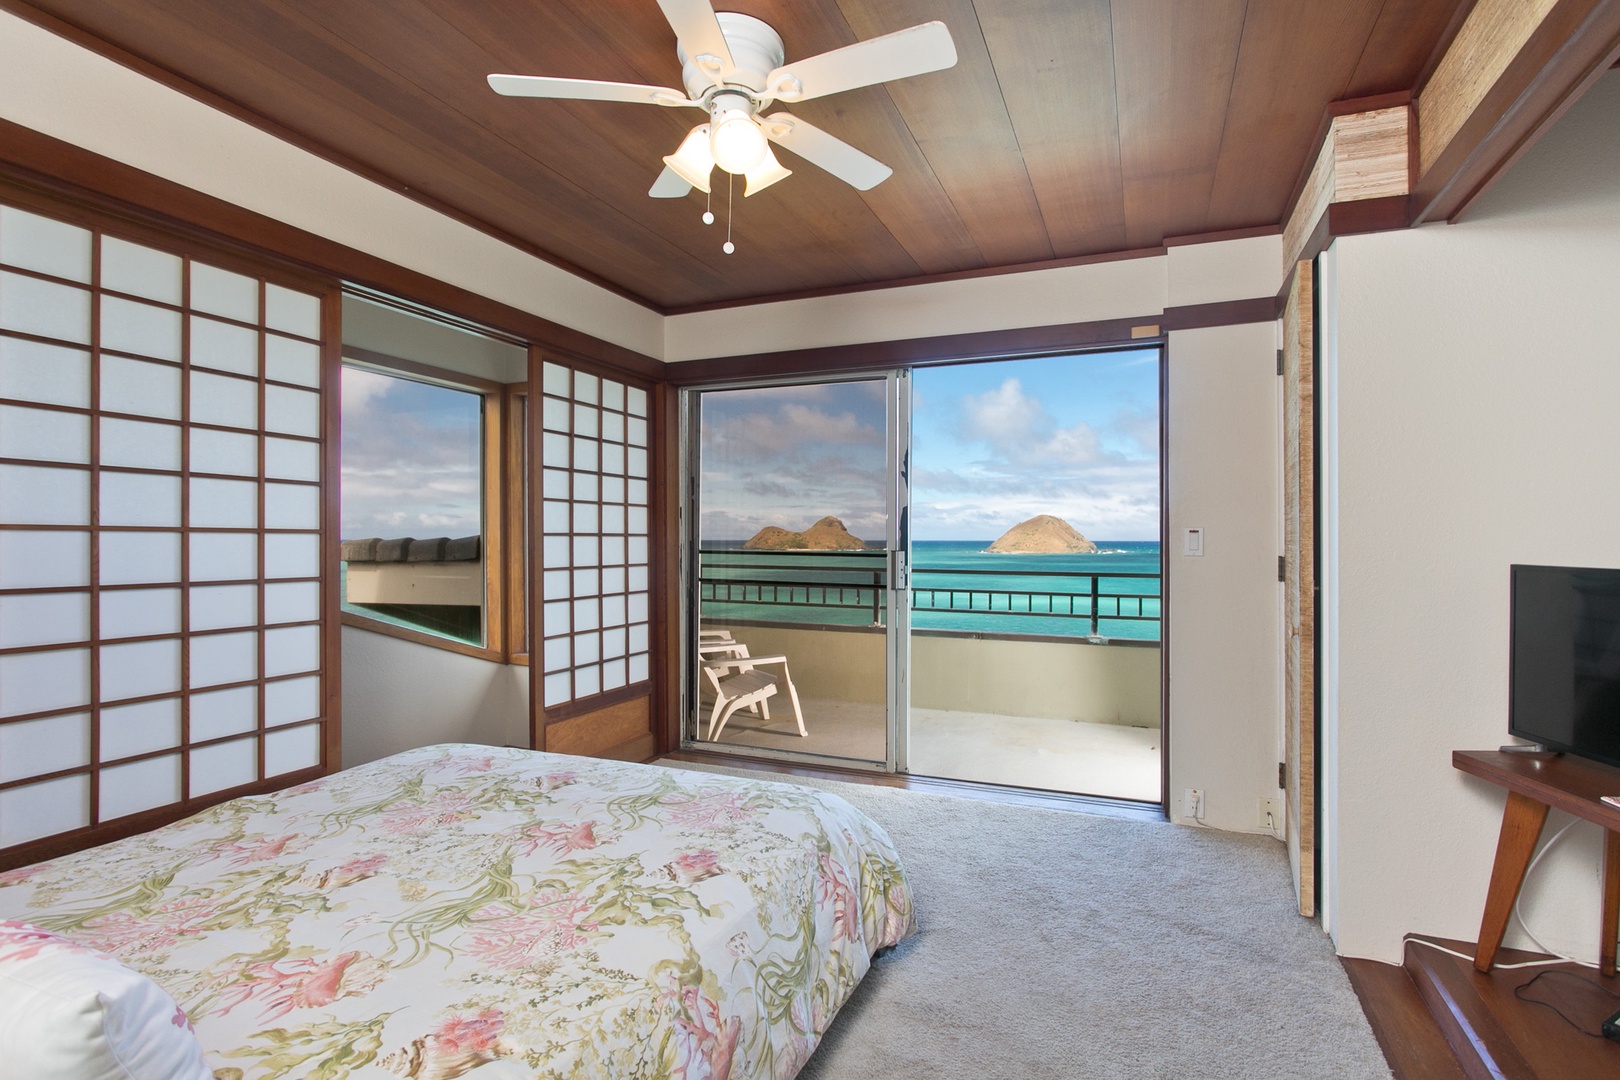 Kailua Vacation Rentals, Hale Kolea* - Guest bedroom 3 with a king bed and private lanai and amazing views.